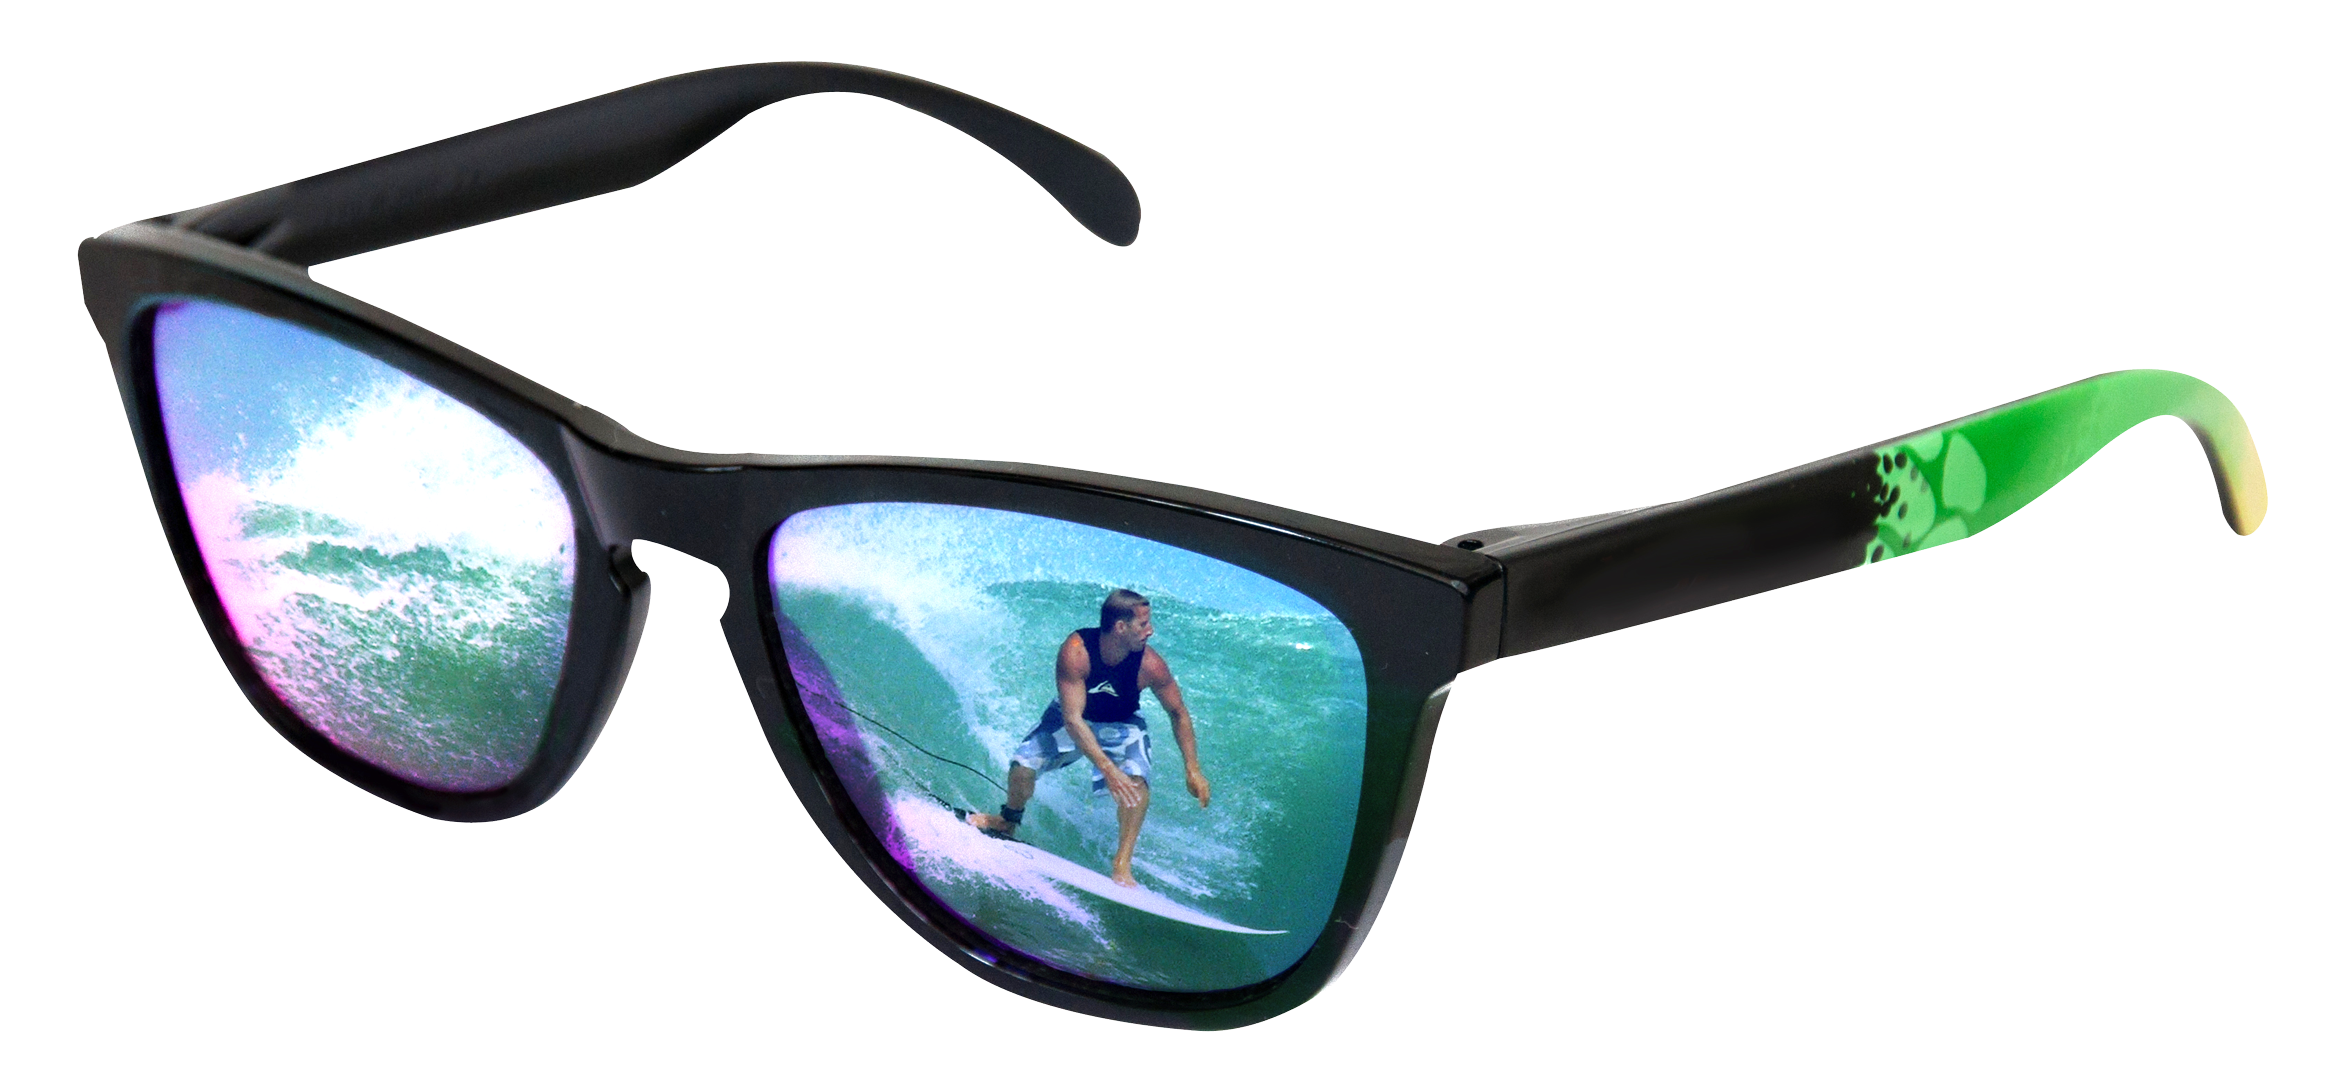 Sunglasses With Surfer Reflection Png Image - Sunglasses, Transparent background PNG HD thumbnail